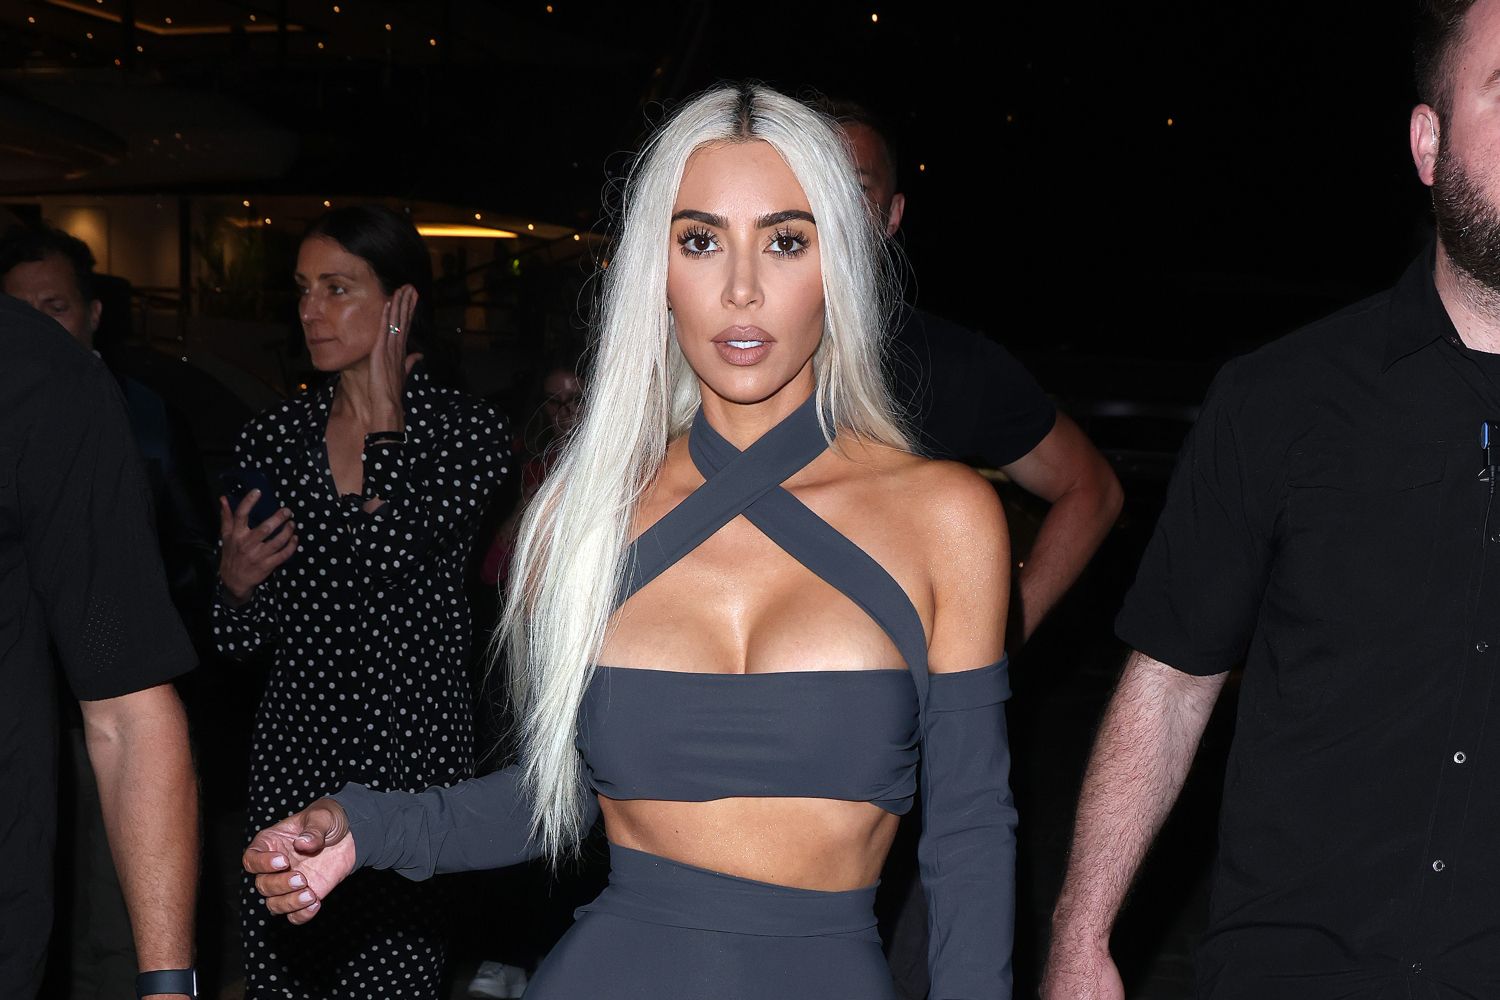 Kim Kardashian is seen arriving at Ristorante Puny in Portofino on May 20, 2022 in Portofino, Italy. Here's what Kim has to say about sex after 40 and Pete Davidson's Big Dick Energy.